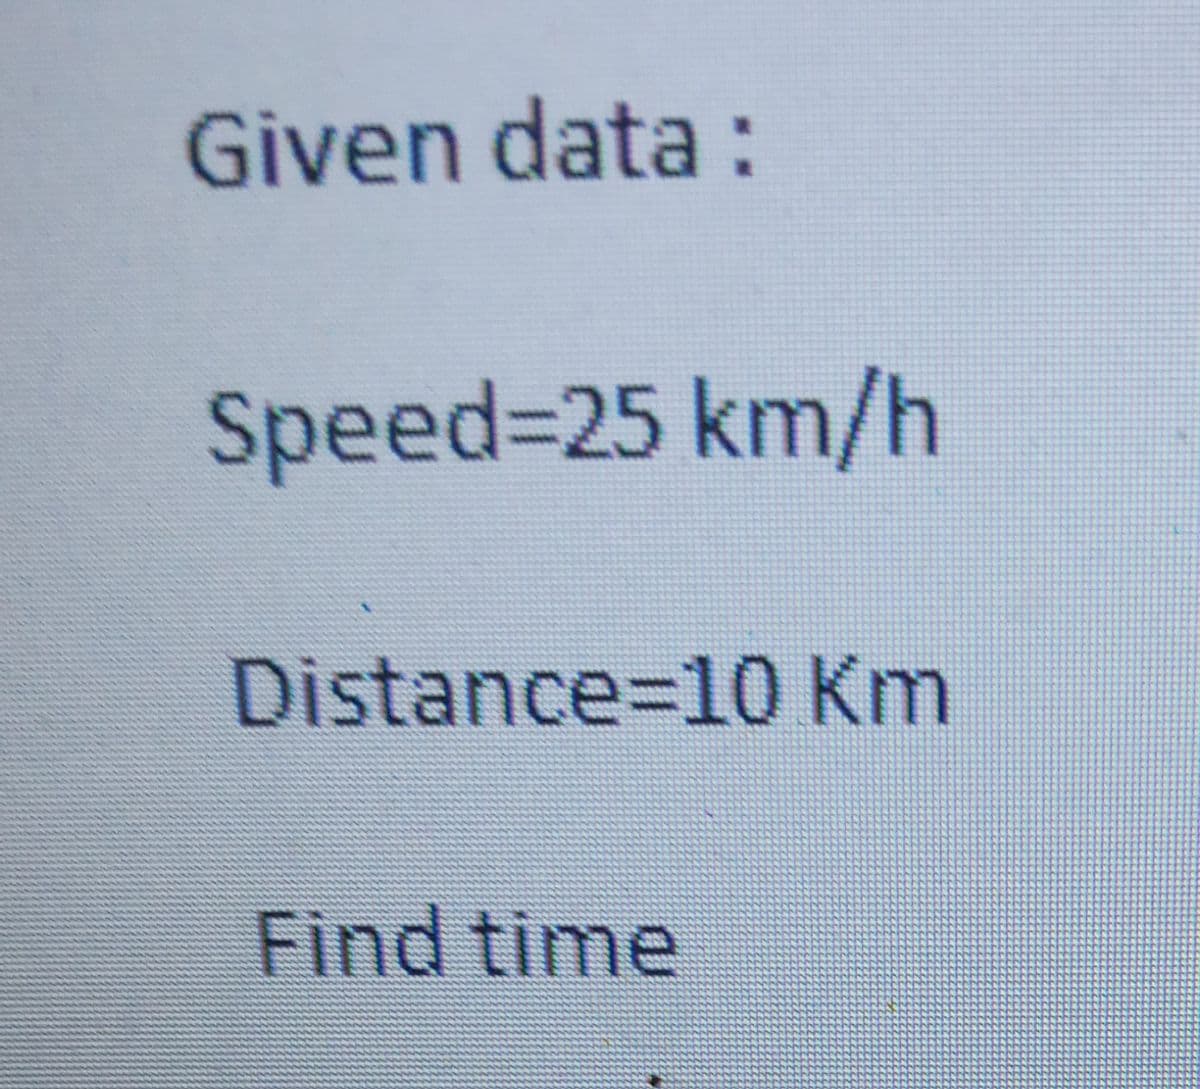 Given data:
Speed%-25 km/h
Distance%3D10 Km
Find time
